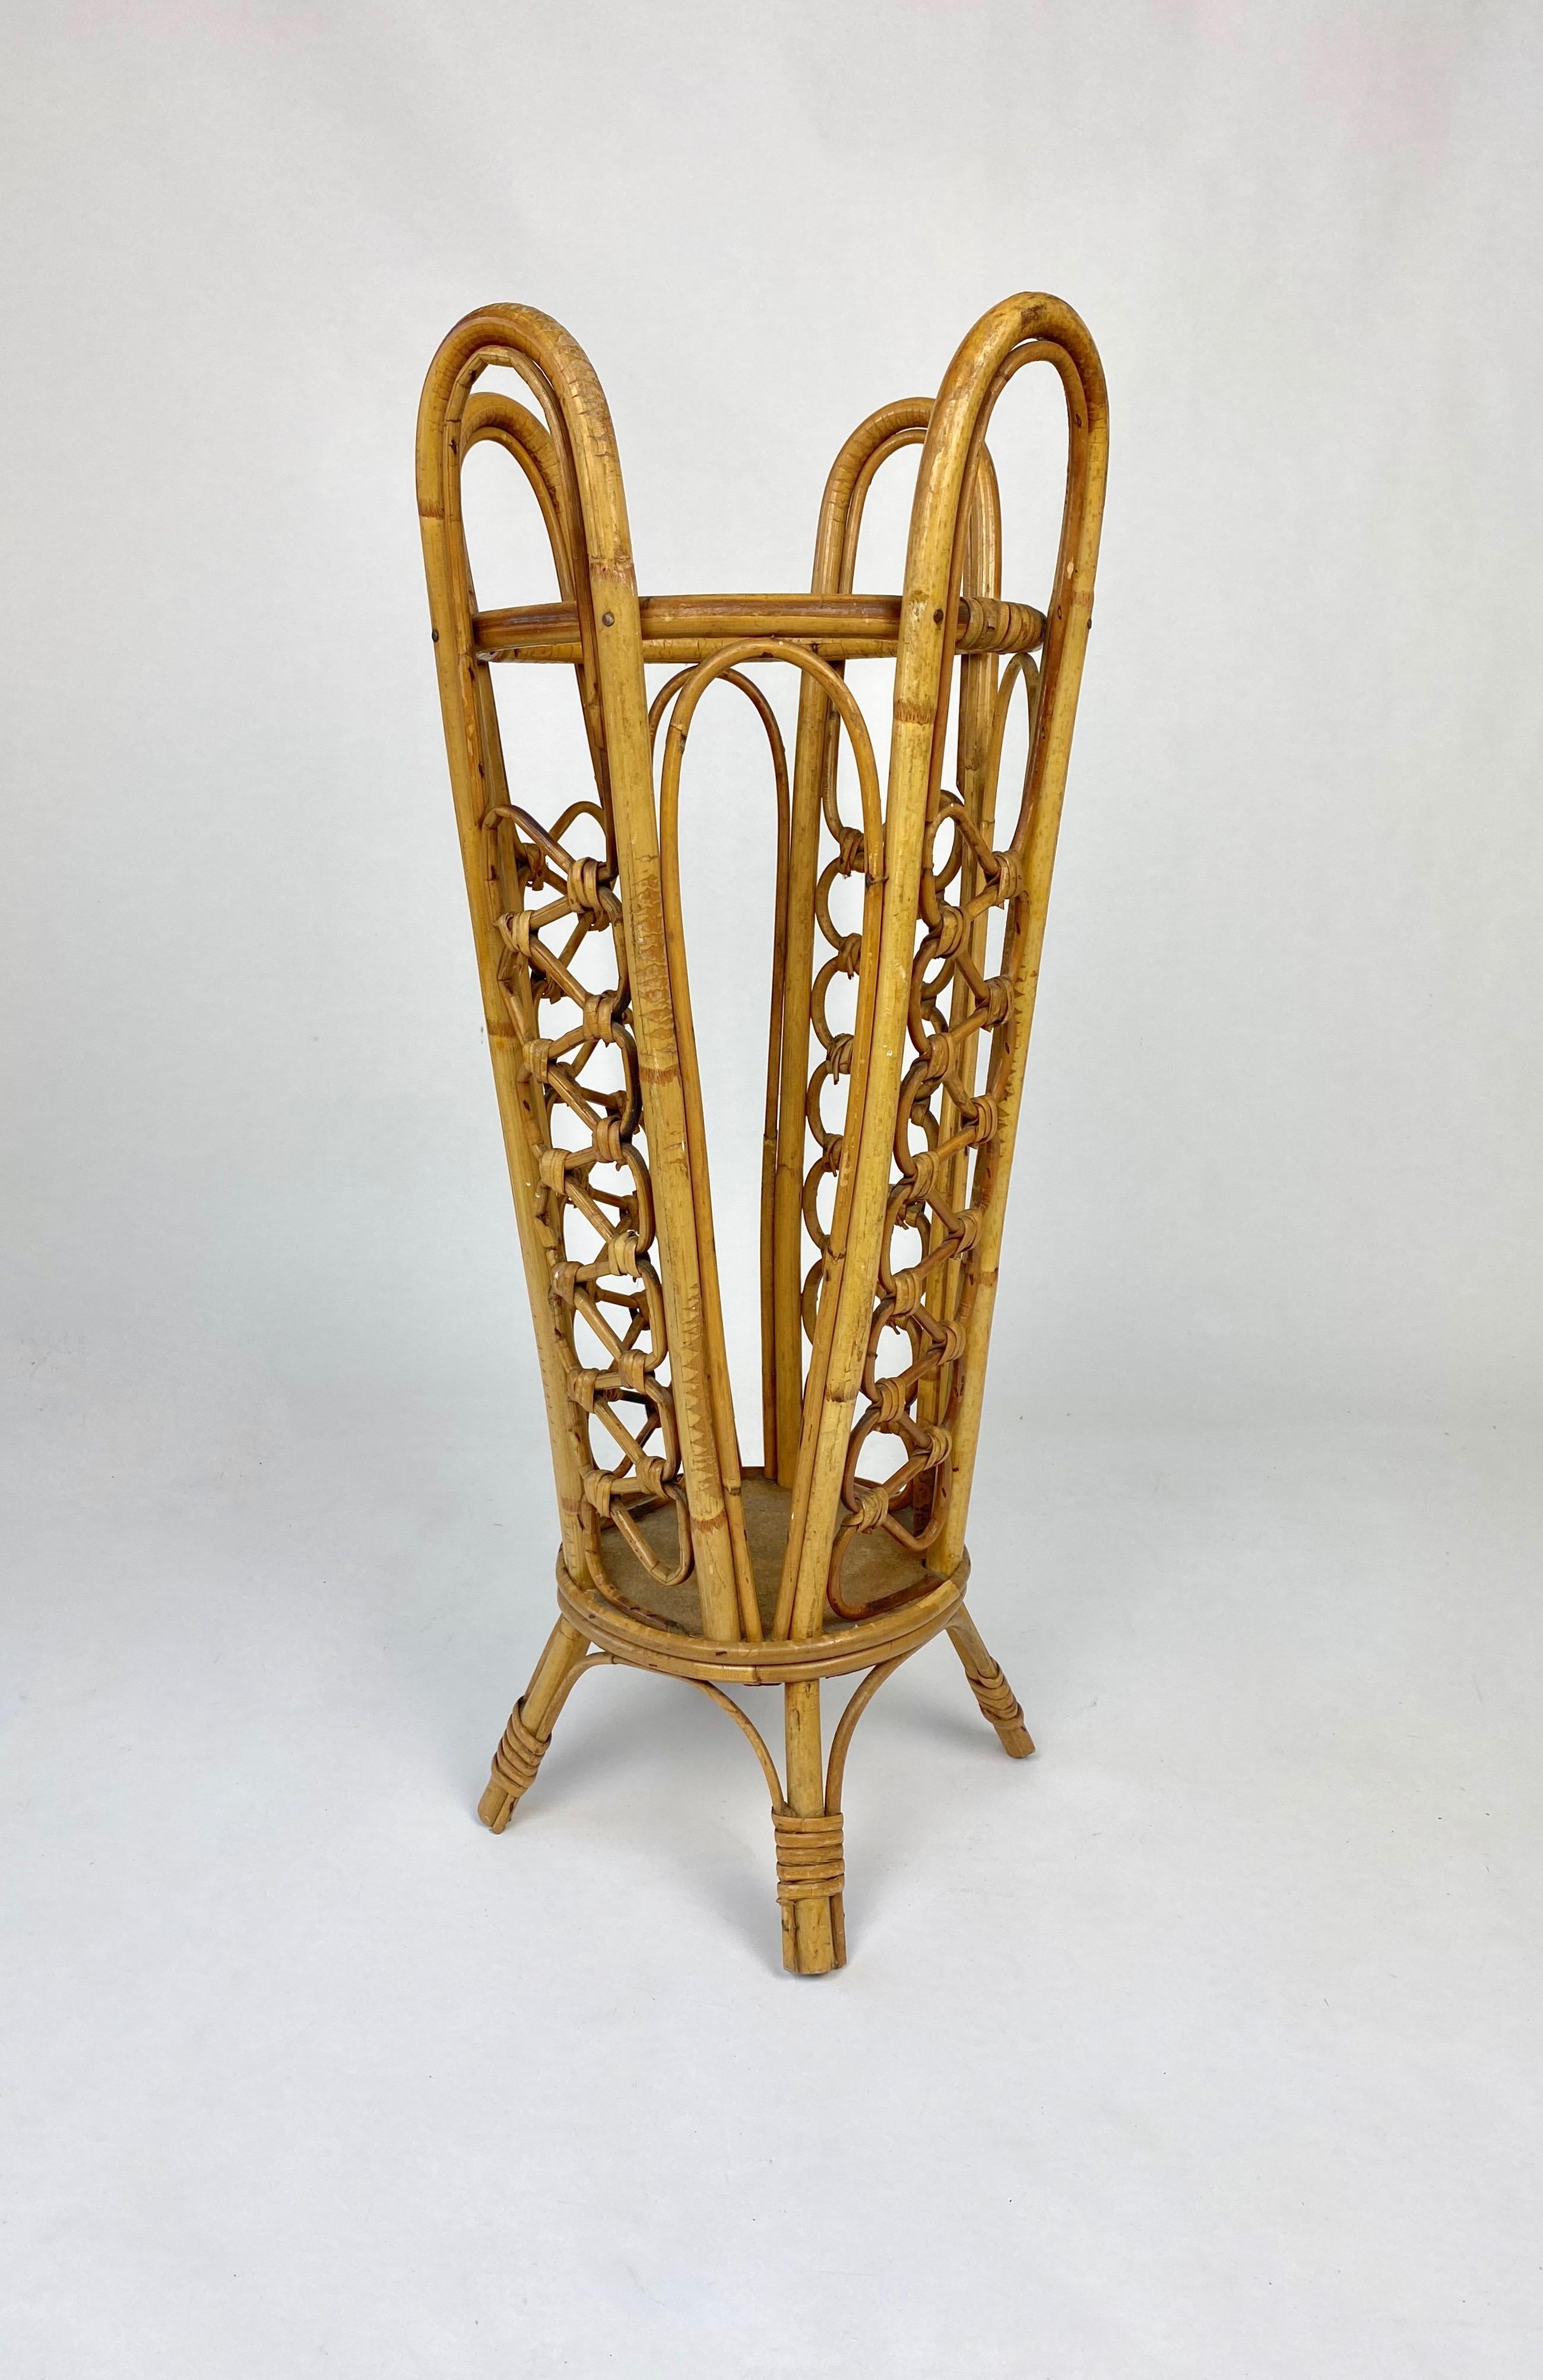 Bamboo and wicker umbrella stand in the style of Franco Albini, Italy, 1960s.